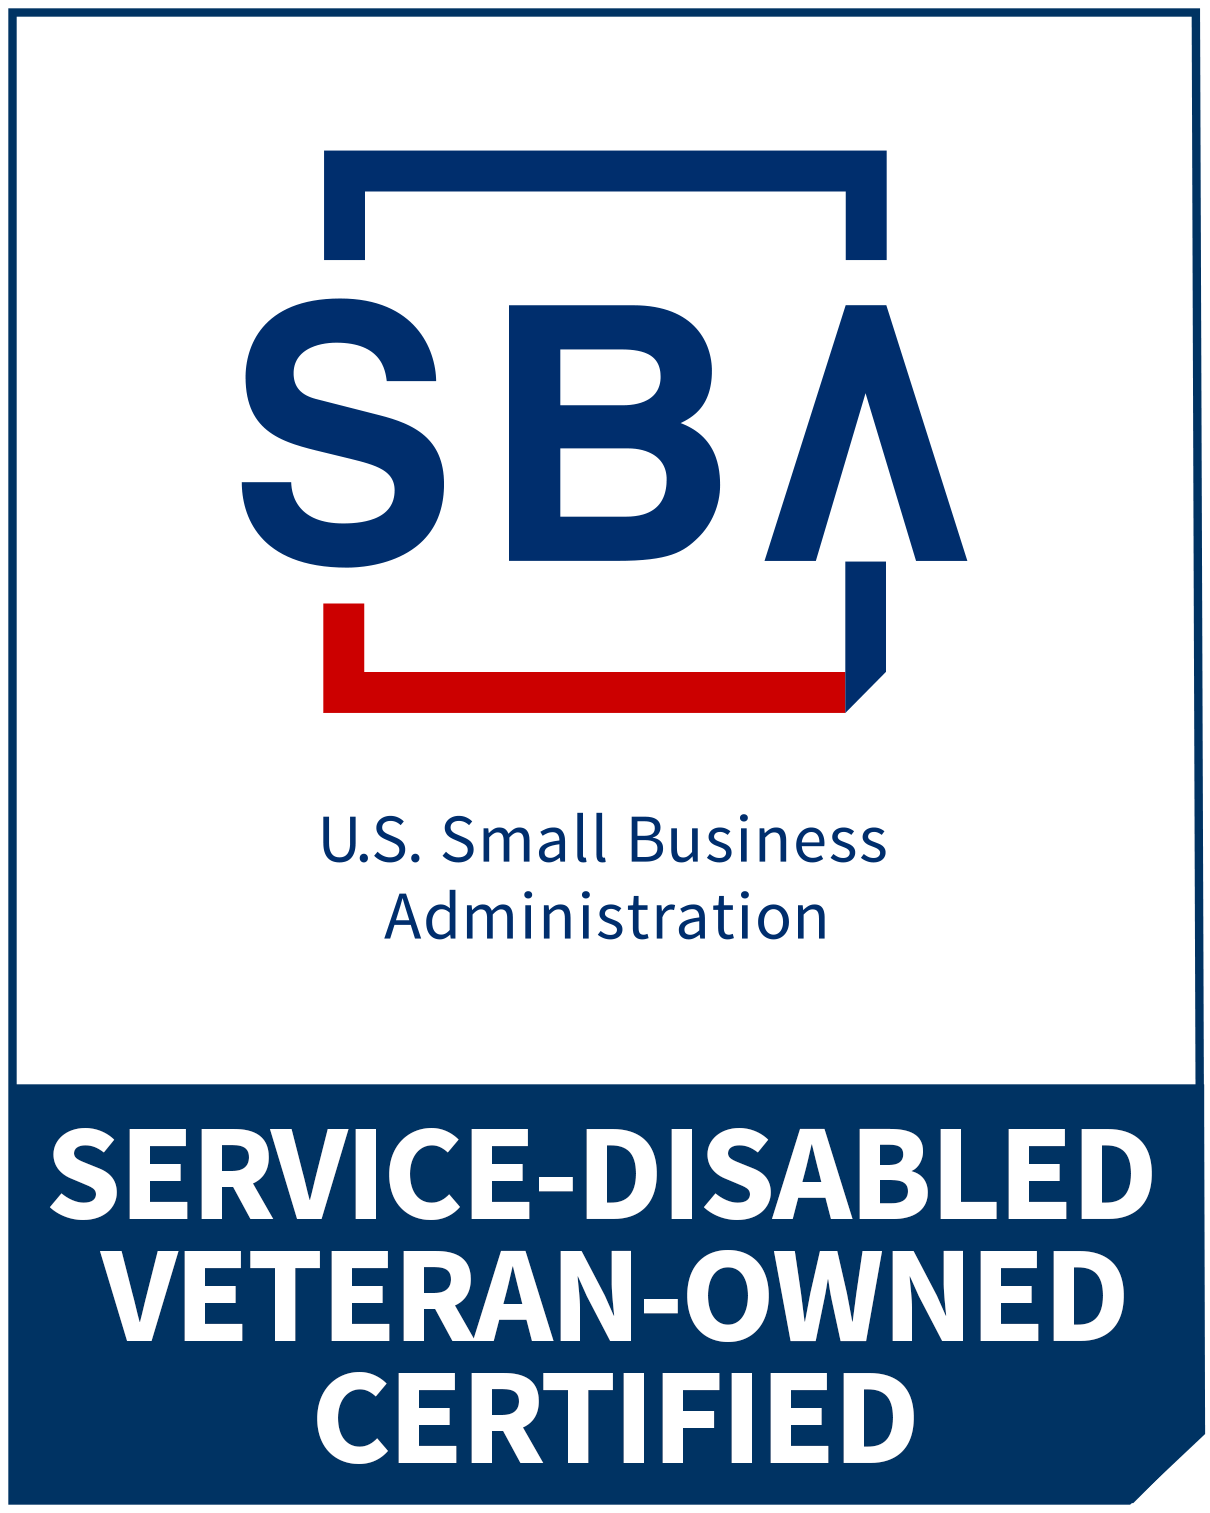 U.S. Small Business Administration Service-Disabled Veteran-Owned